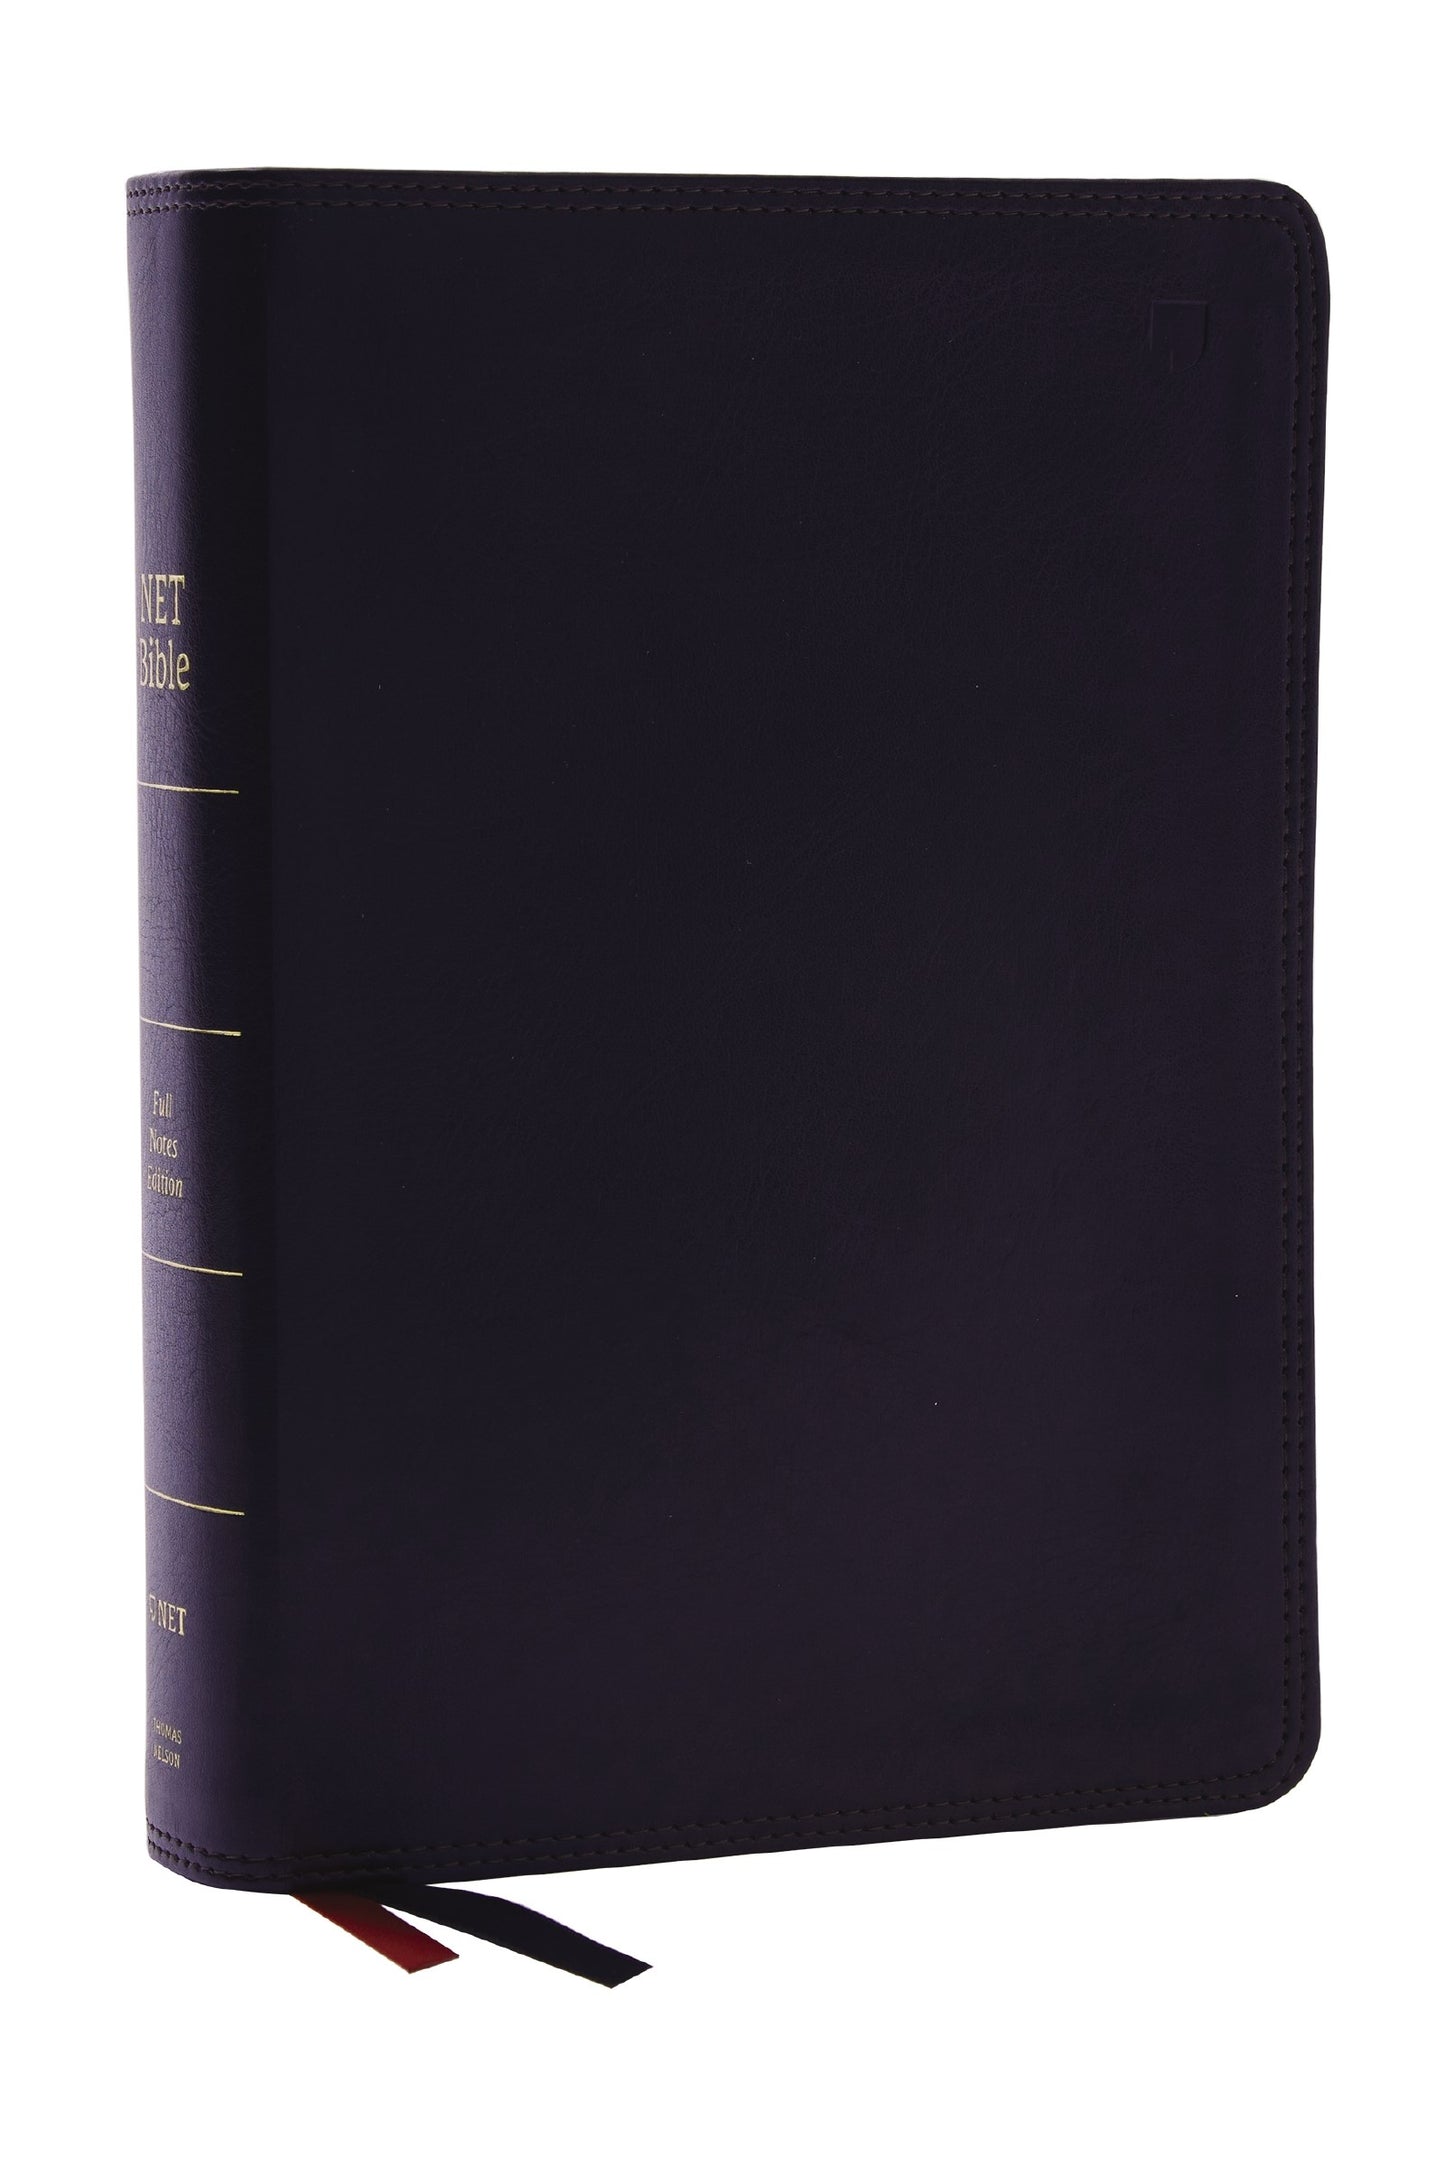 NET Bible (Full-Notes Edition) (Comfort Print)-Black Leathersoft